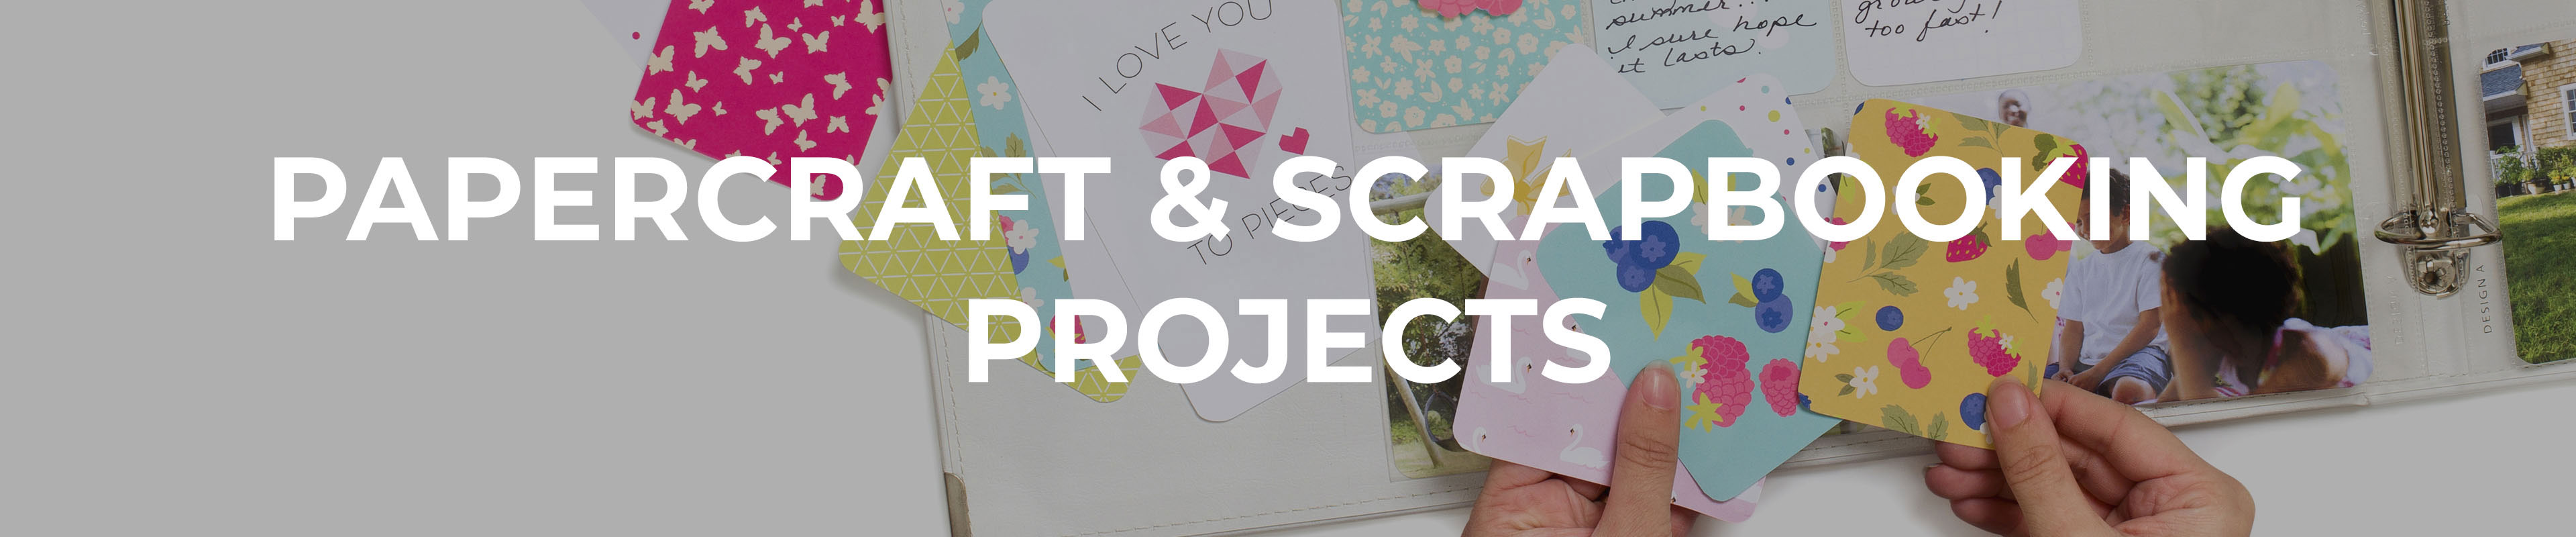 Papercraft & Scrapbooking Projects